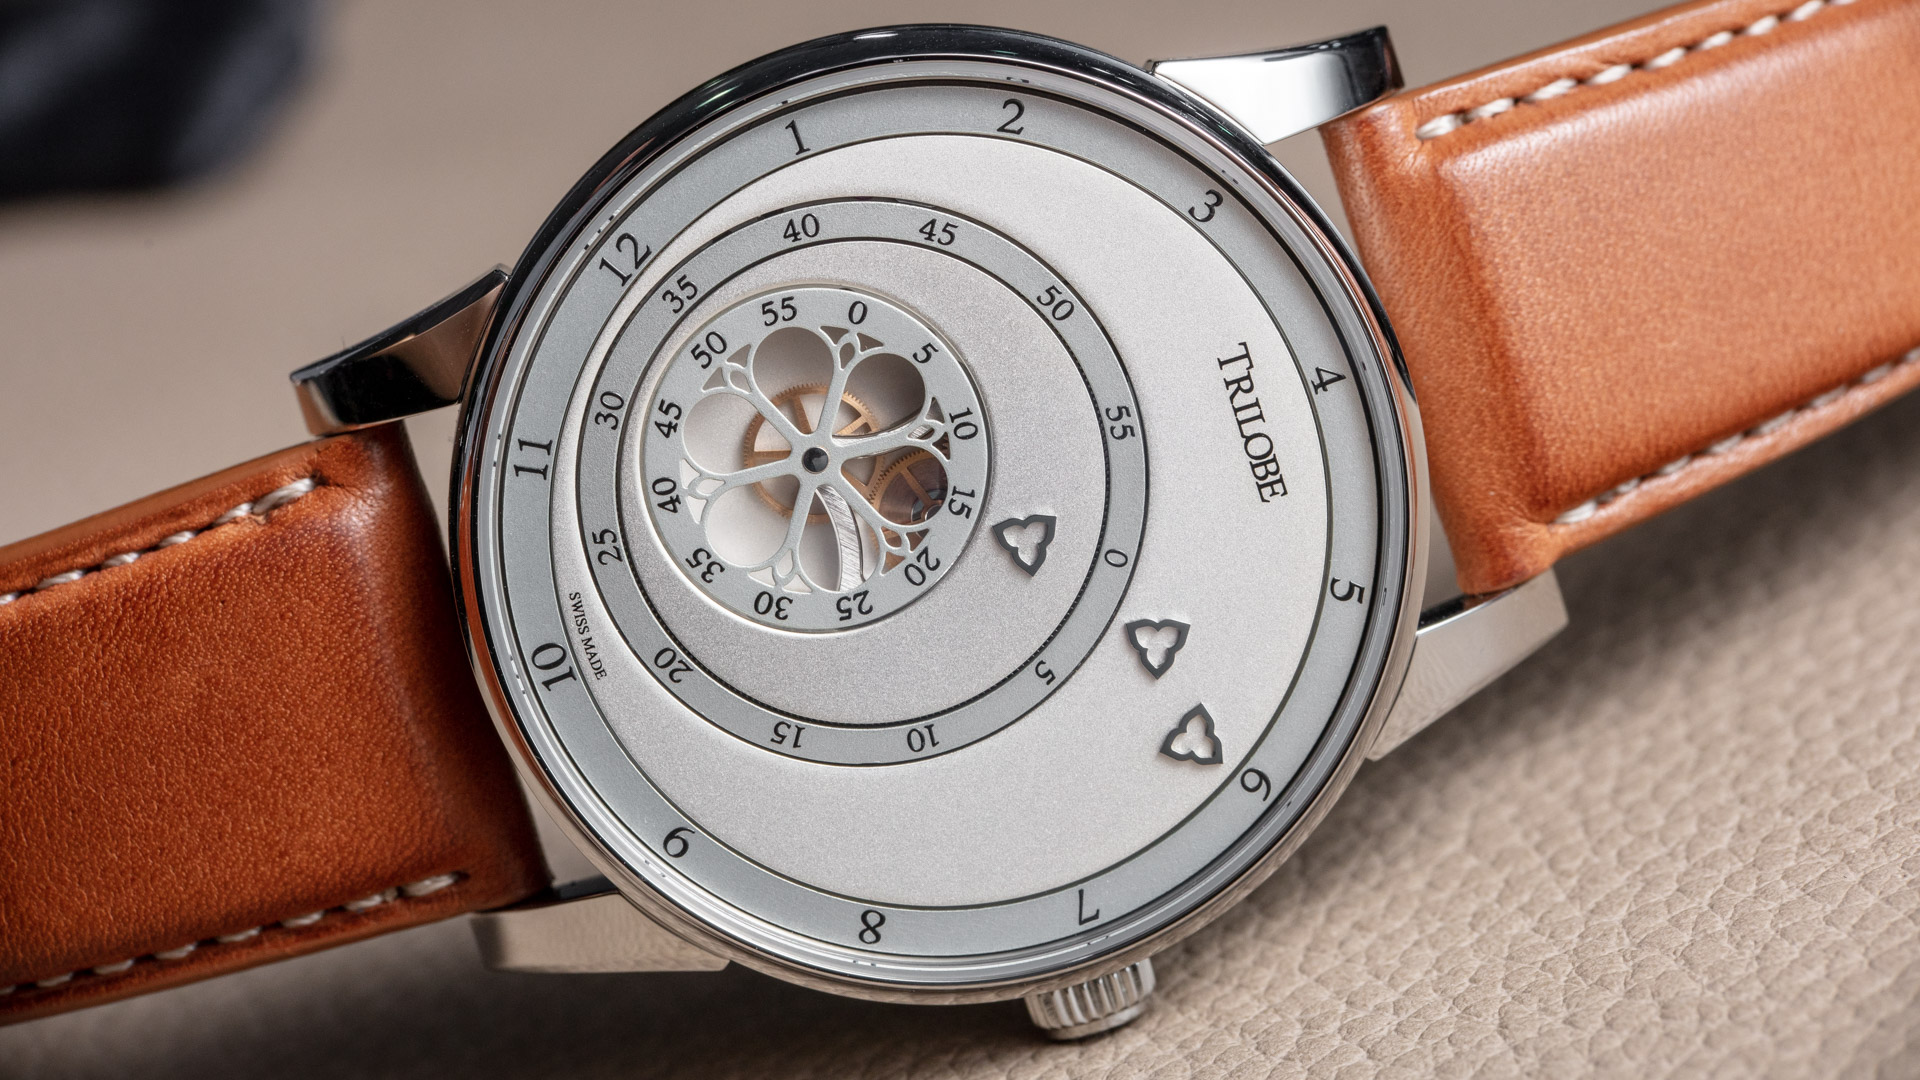 Hands-On: Trilobe Les Matinaux Watch